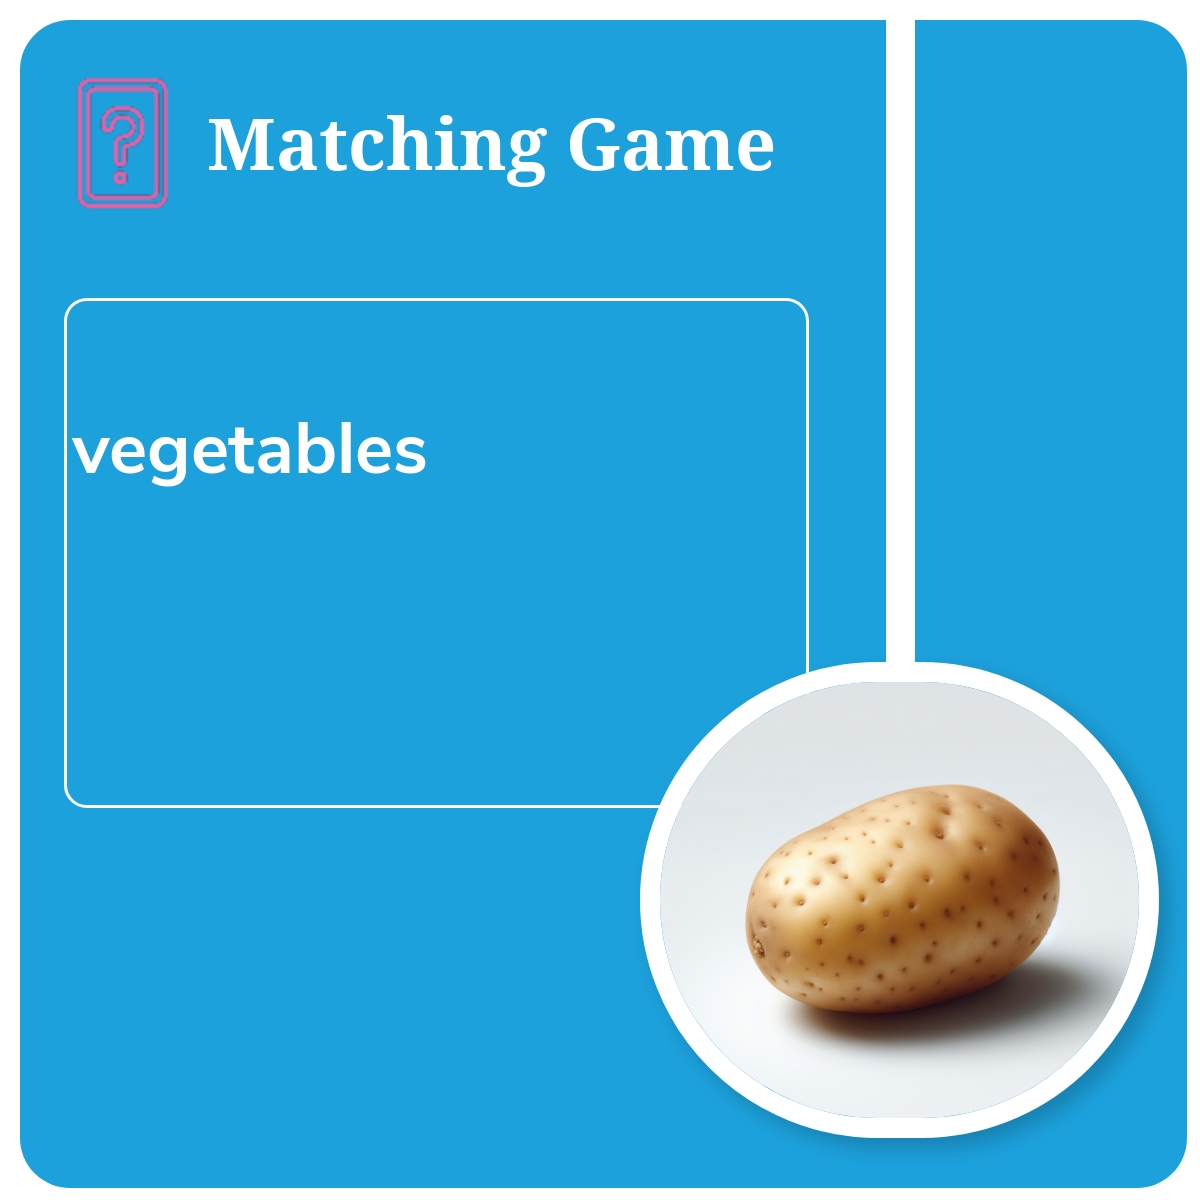 Matching Game: vegetables